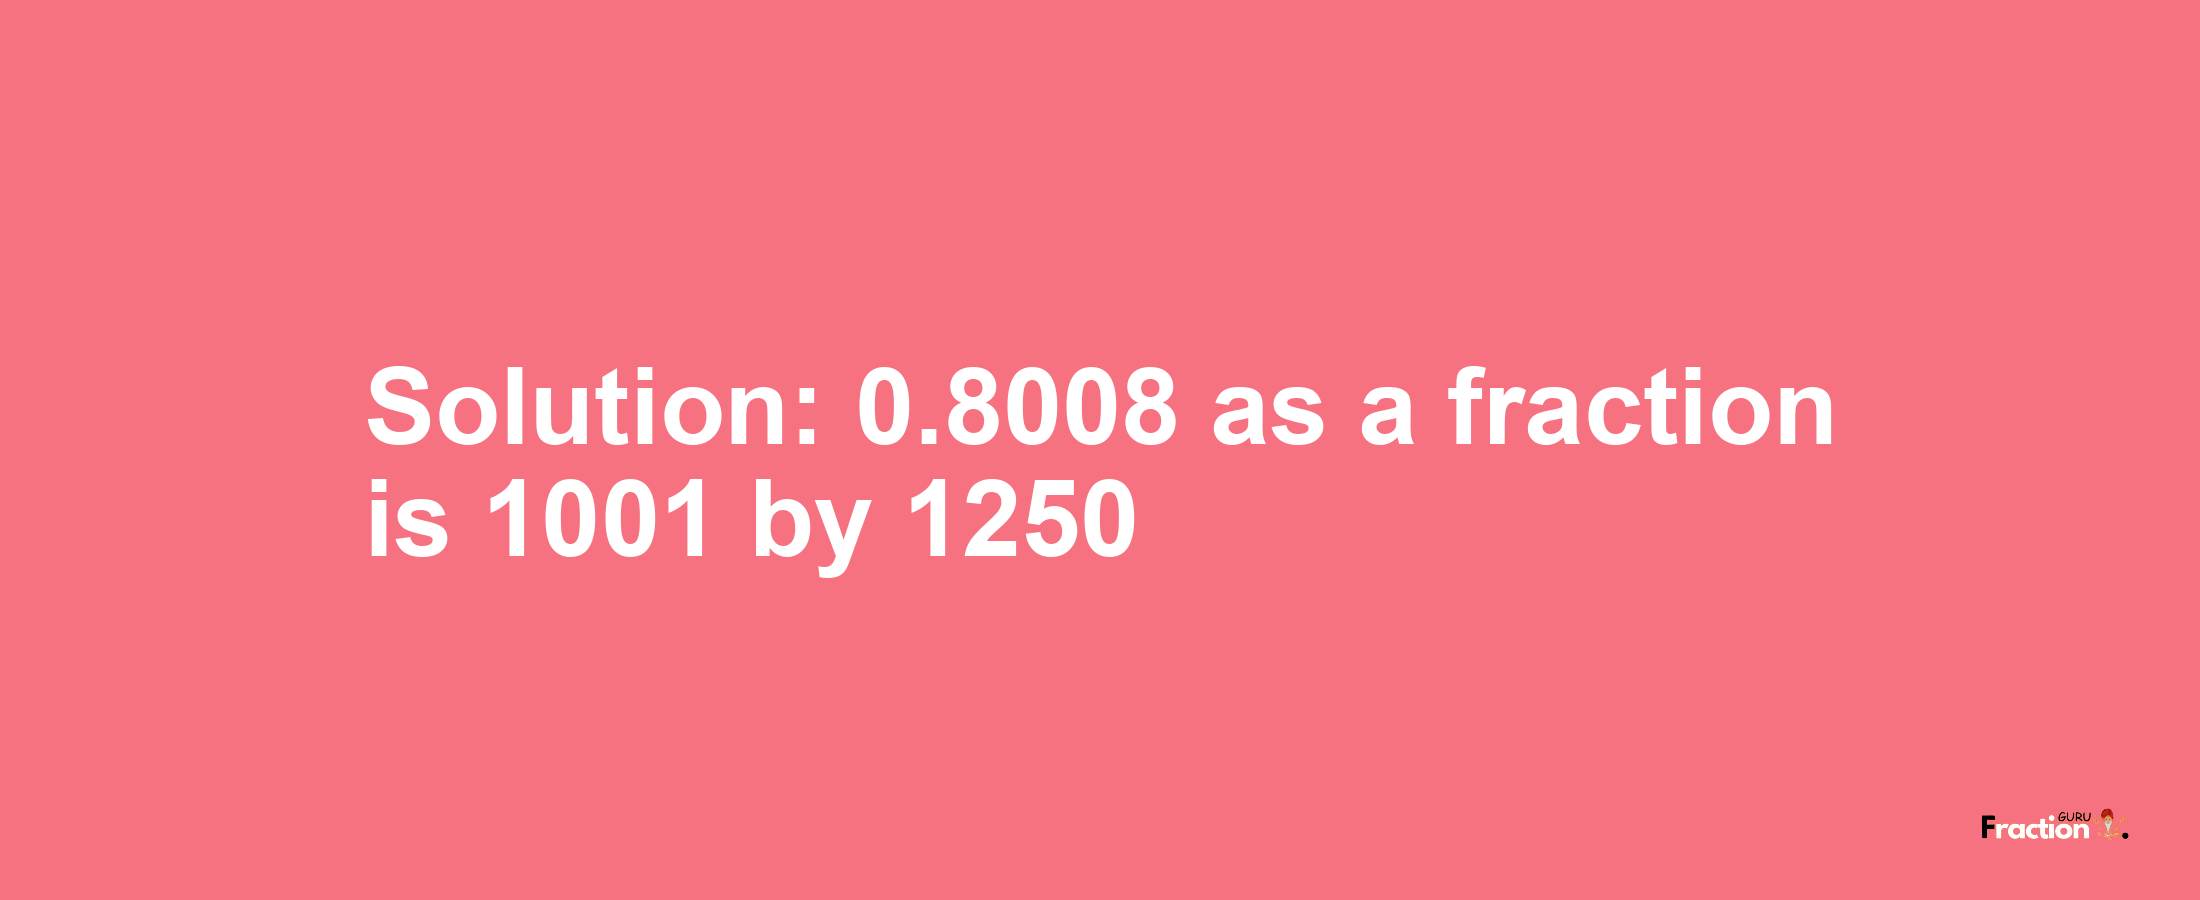 Solution:0.8008 as a fraction is 1001/1250